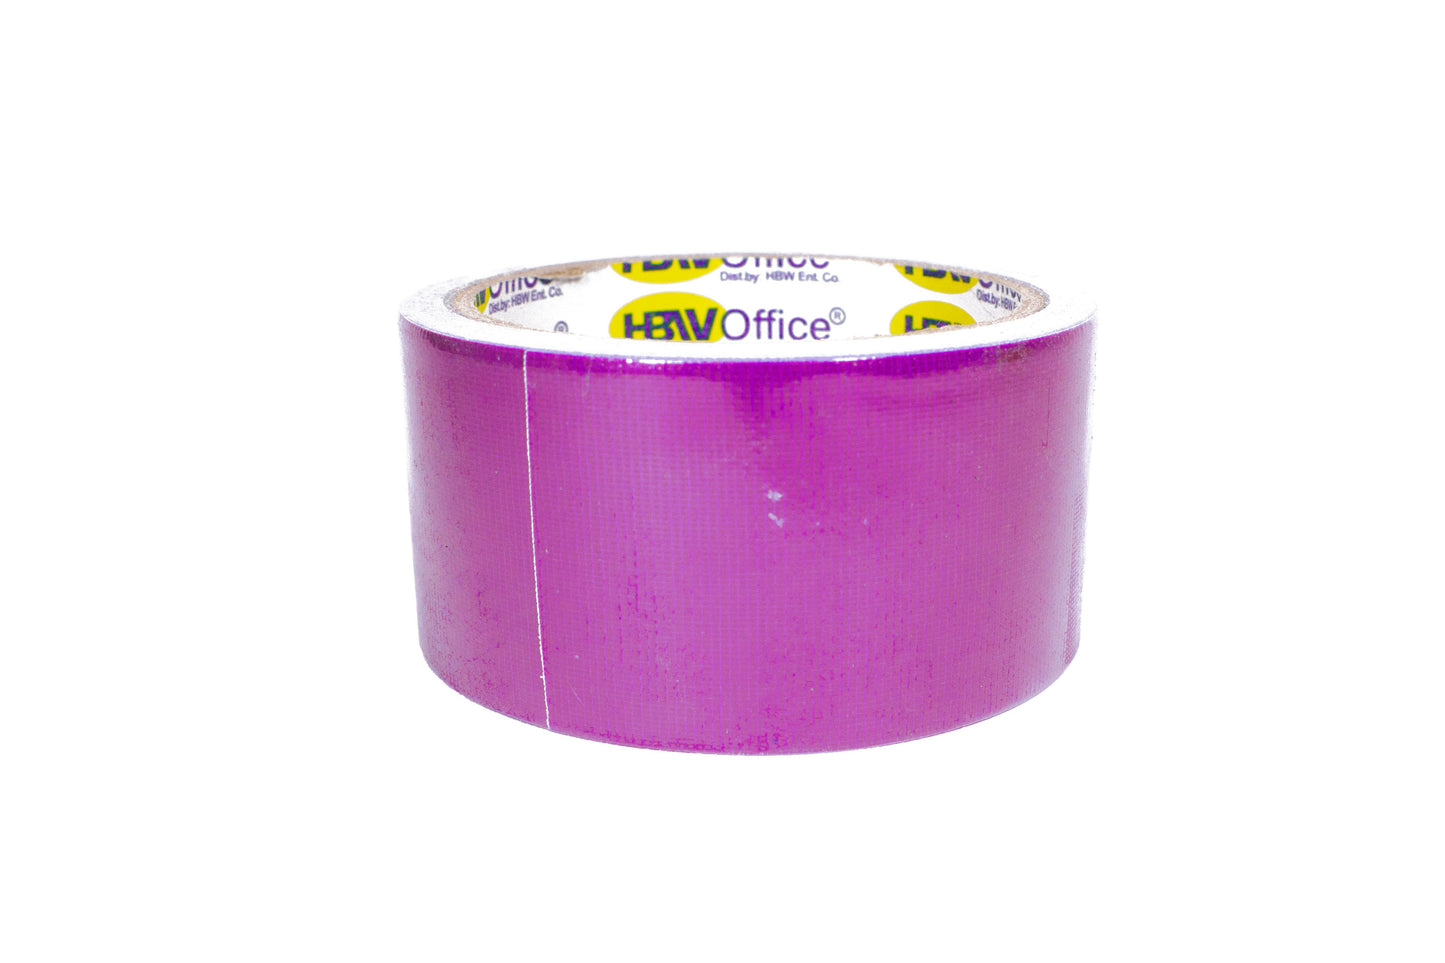 HBW Duct Tape 2inx11yd | Sold by 6s